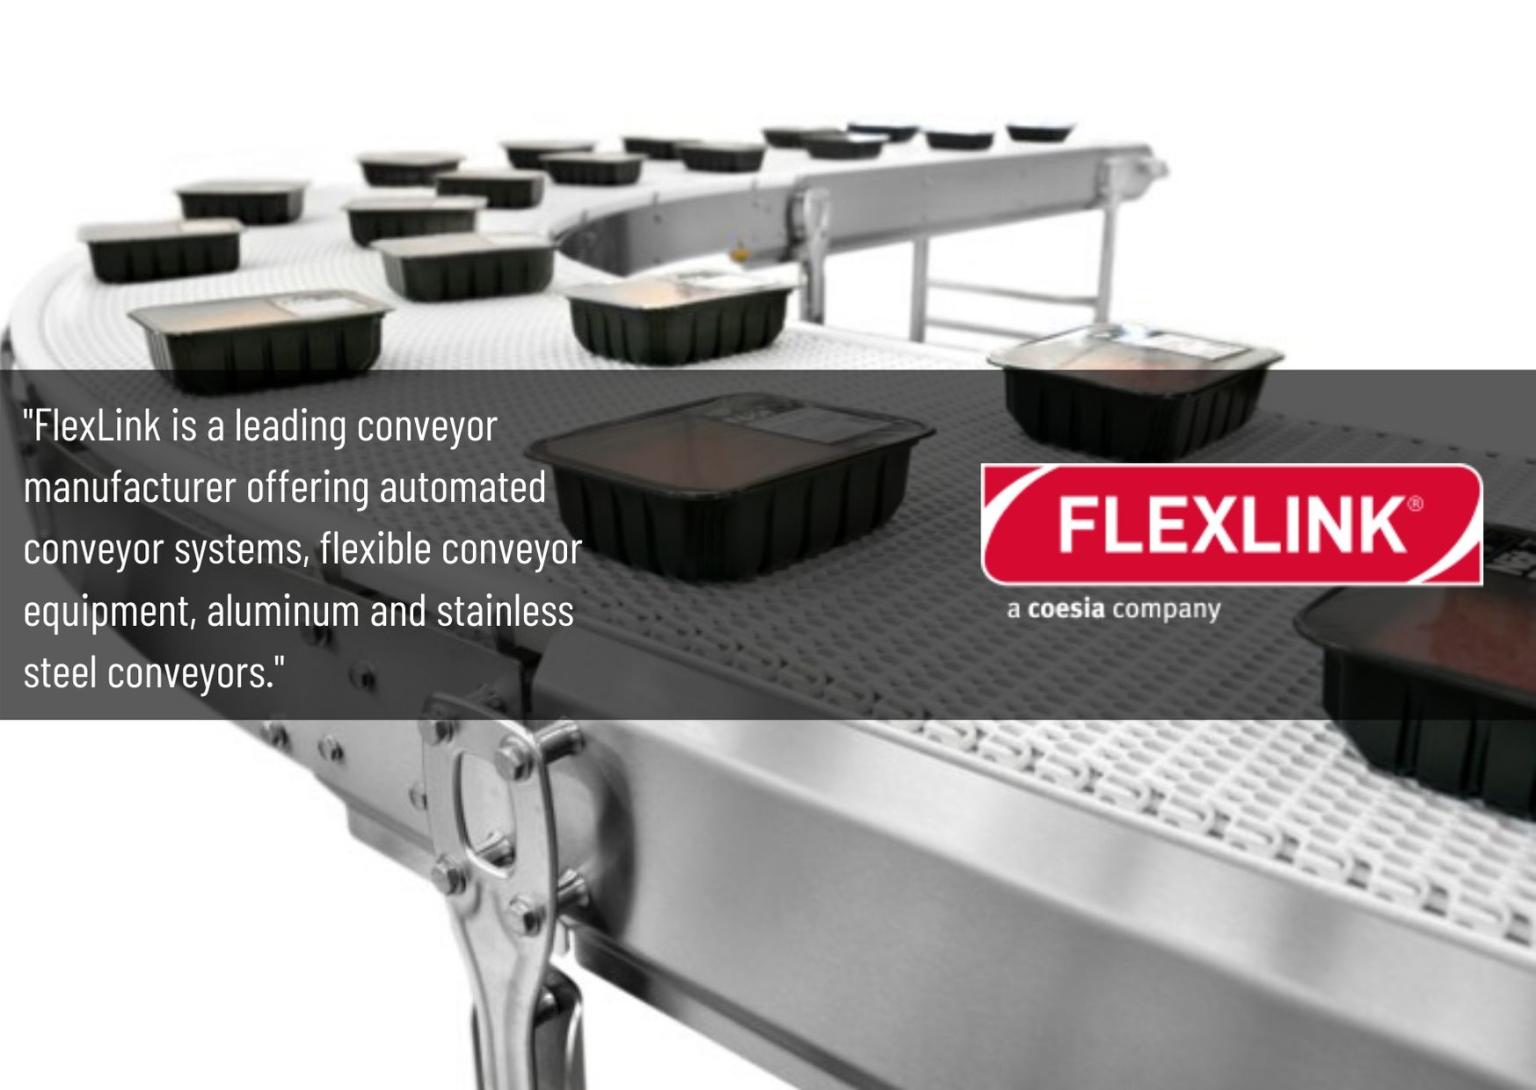 Clienti: FlexLink Systems S.p.A.